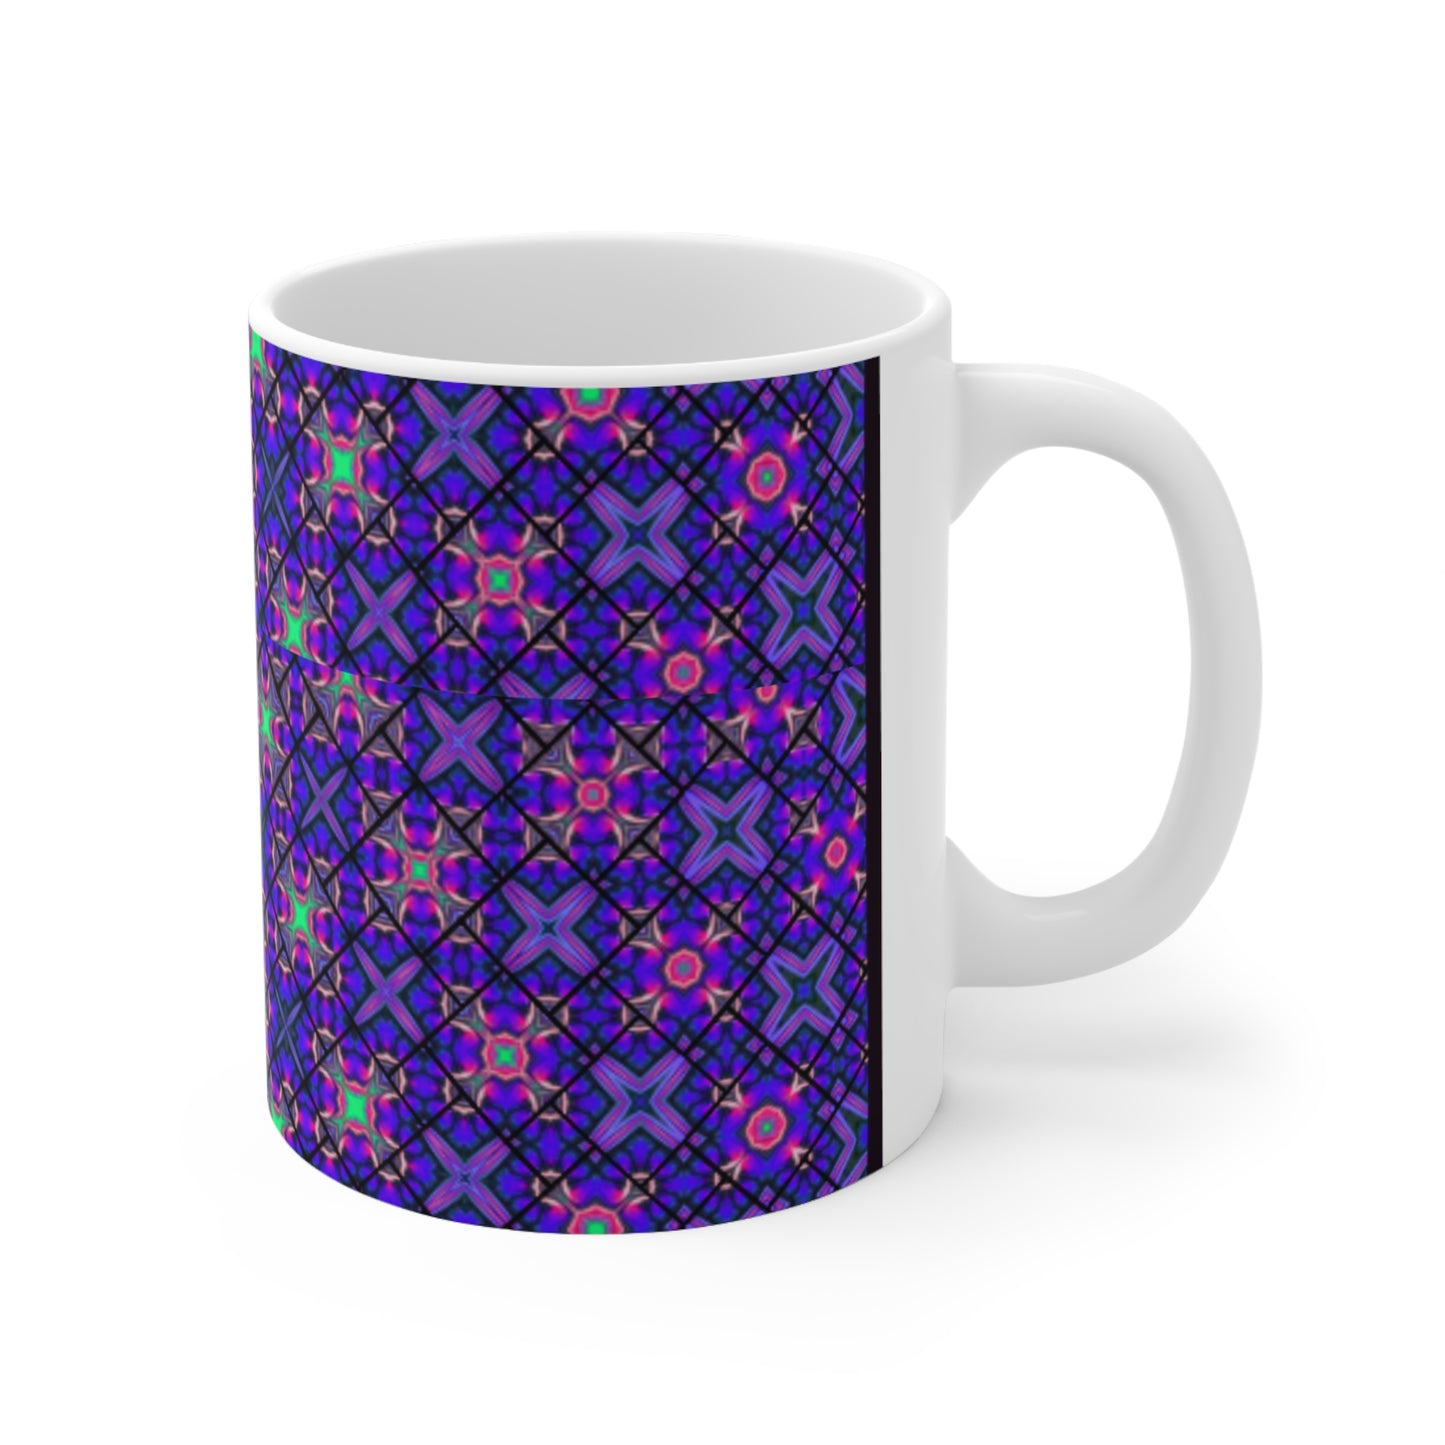 Blue, Green, and Red Plaid on white mug